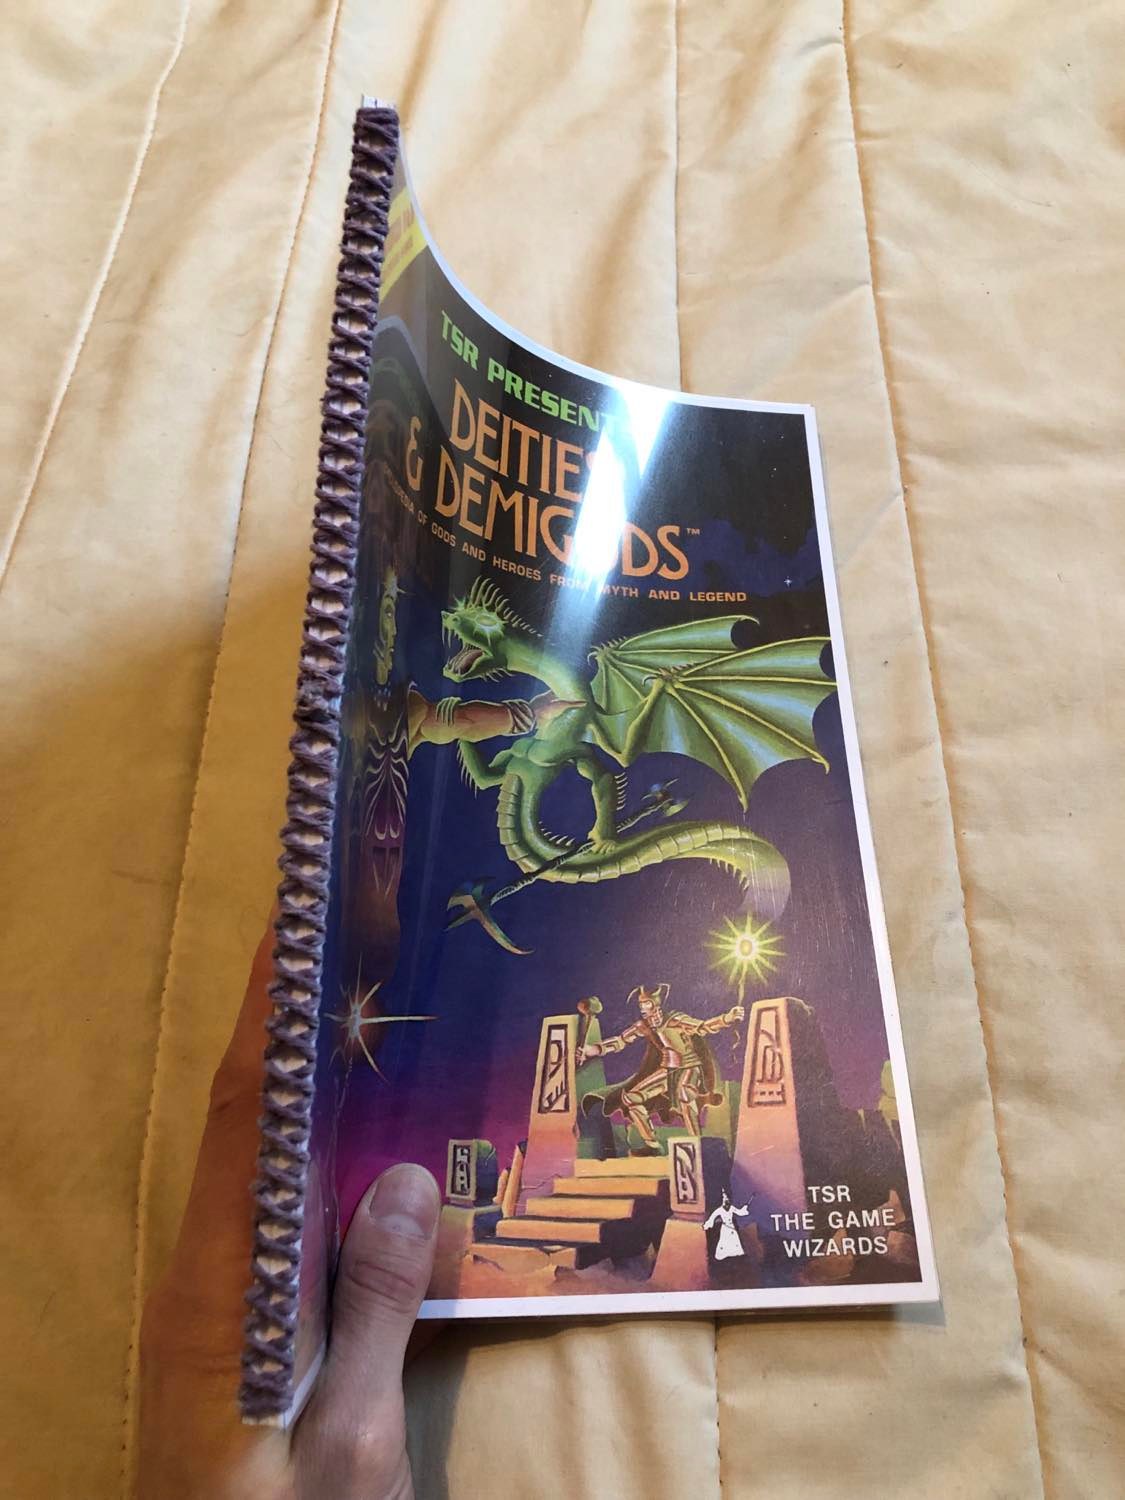 The book for Deities and Demigods, the first edition book, with a purple cover showing a golden God holding a giant Serpent, and a lower scene of a warrior approaching a giant stone throne with another figure on it, though I mainly just got this book to be able to talk to Deities from many different Religions.